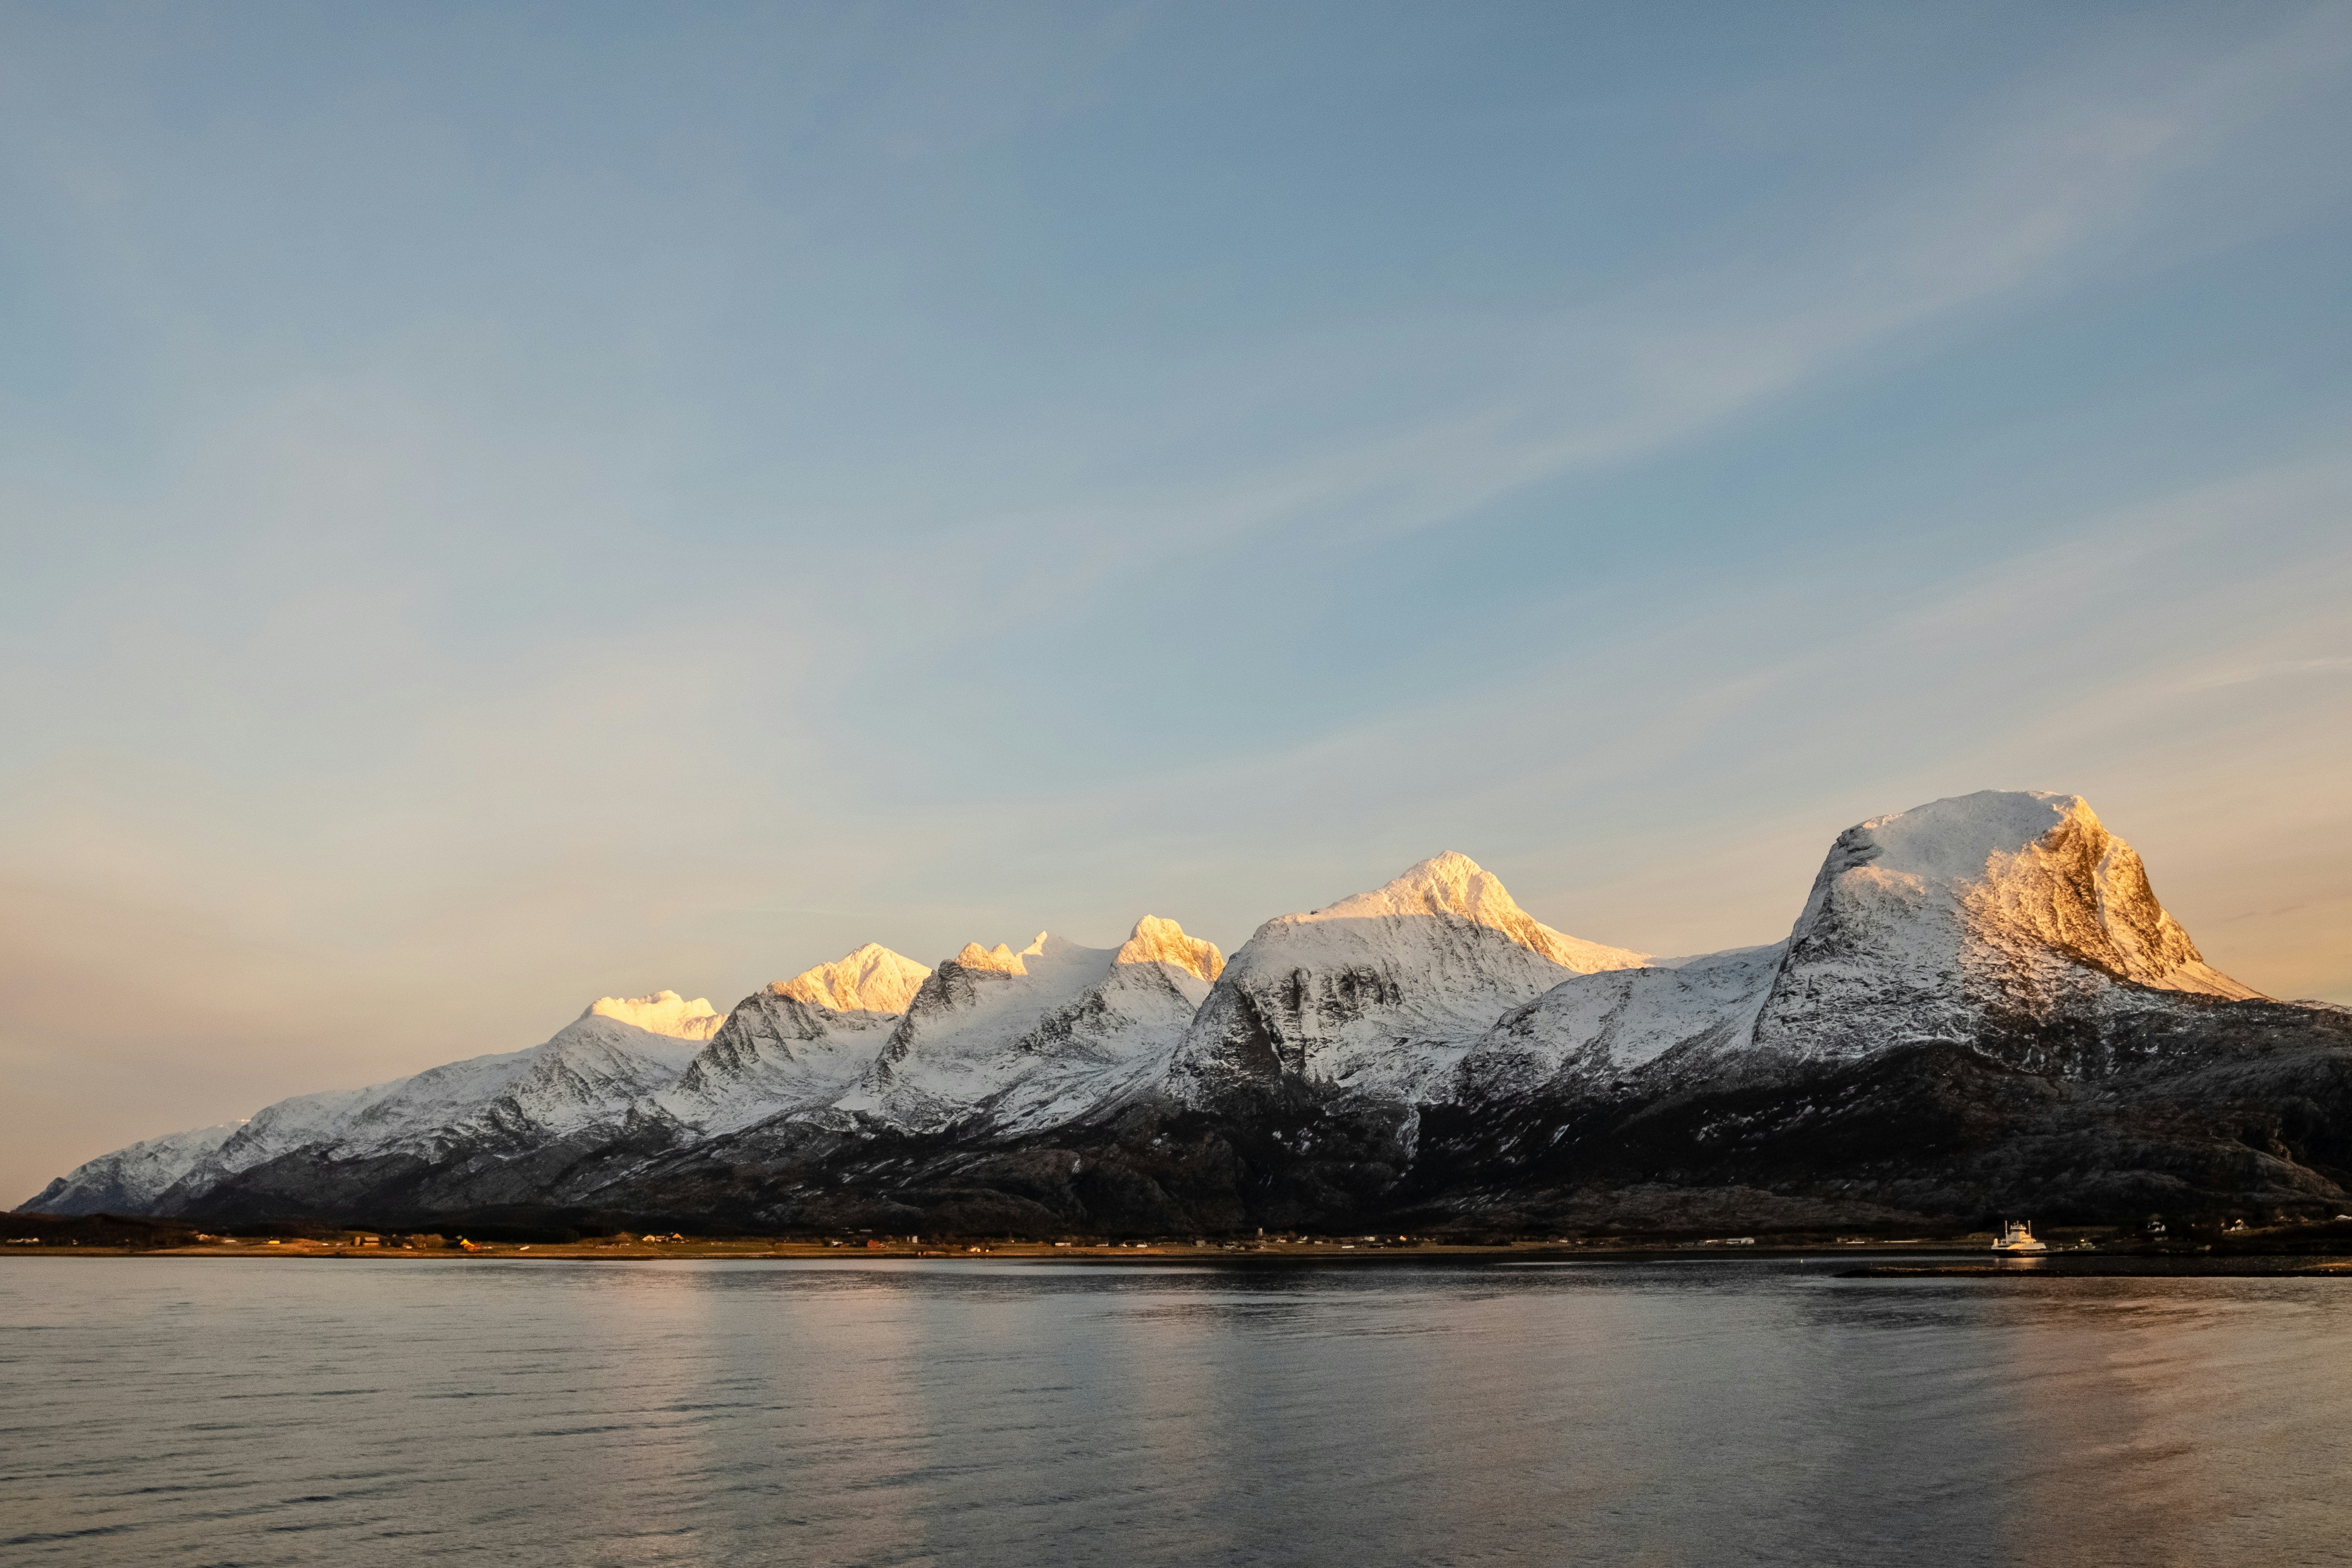 View of the Seven Sisters Mountains from the deck of a Hurtigruten cruise ship along Norway's coast